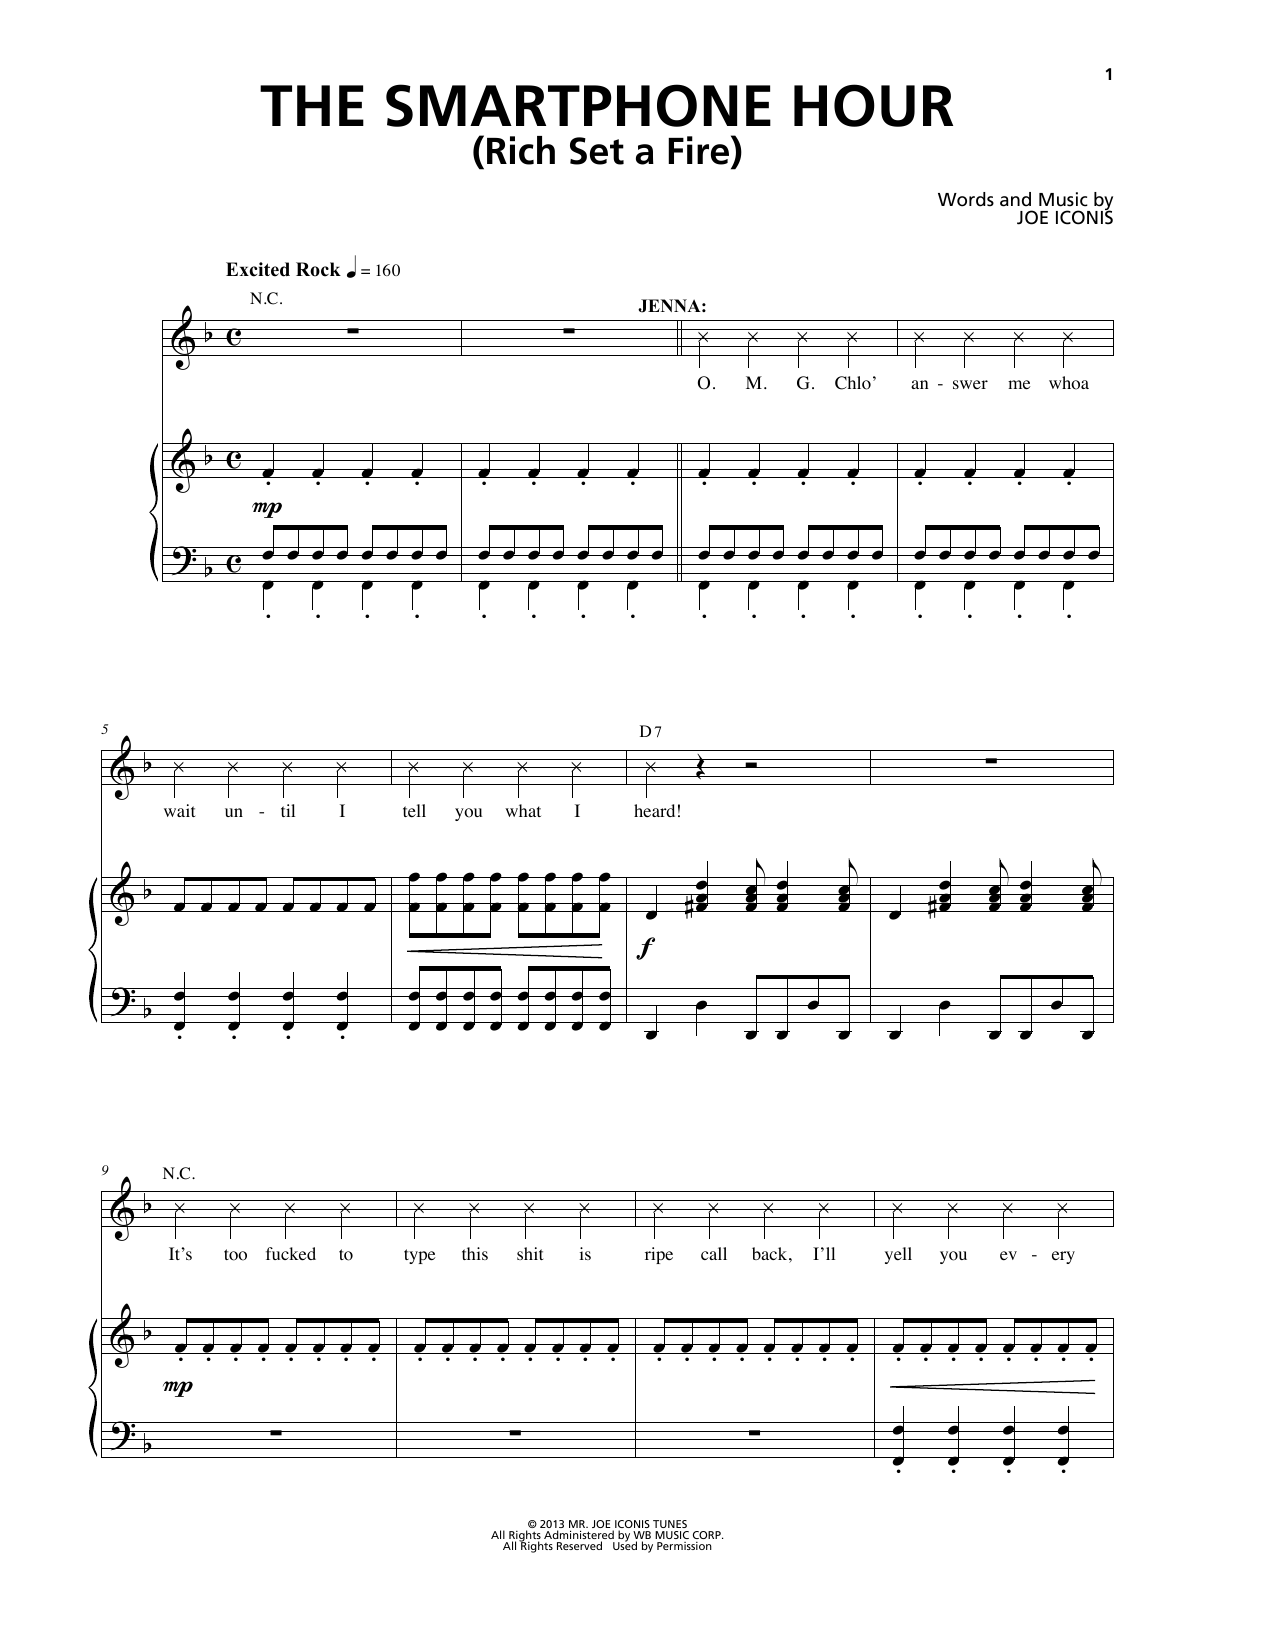 Download Joe Iconis The Smartphone Hour (Rich Set A Fire) ( Sheet Music